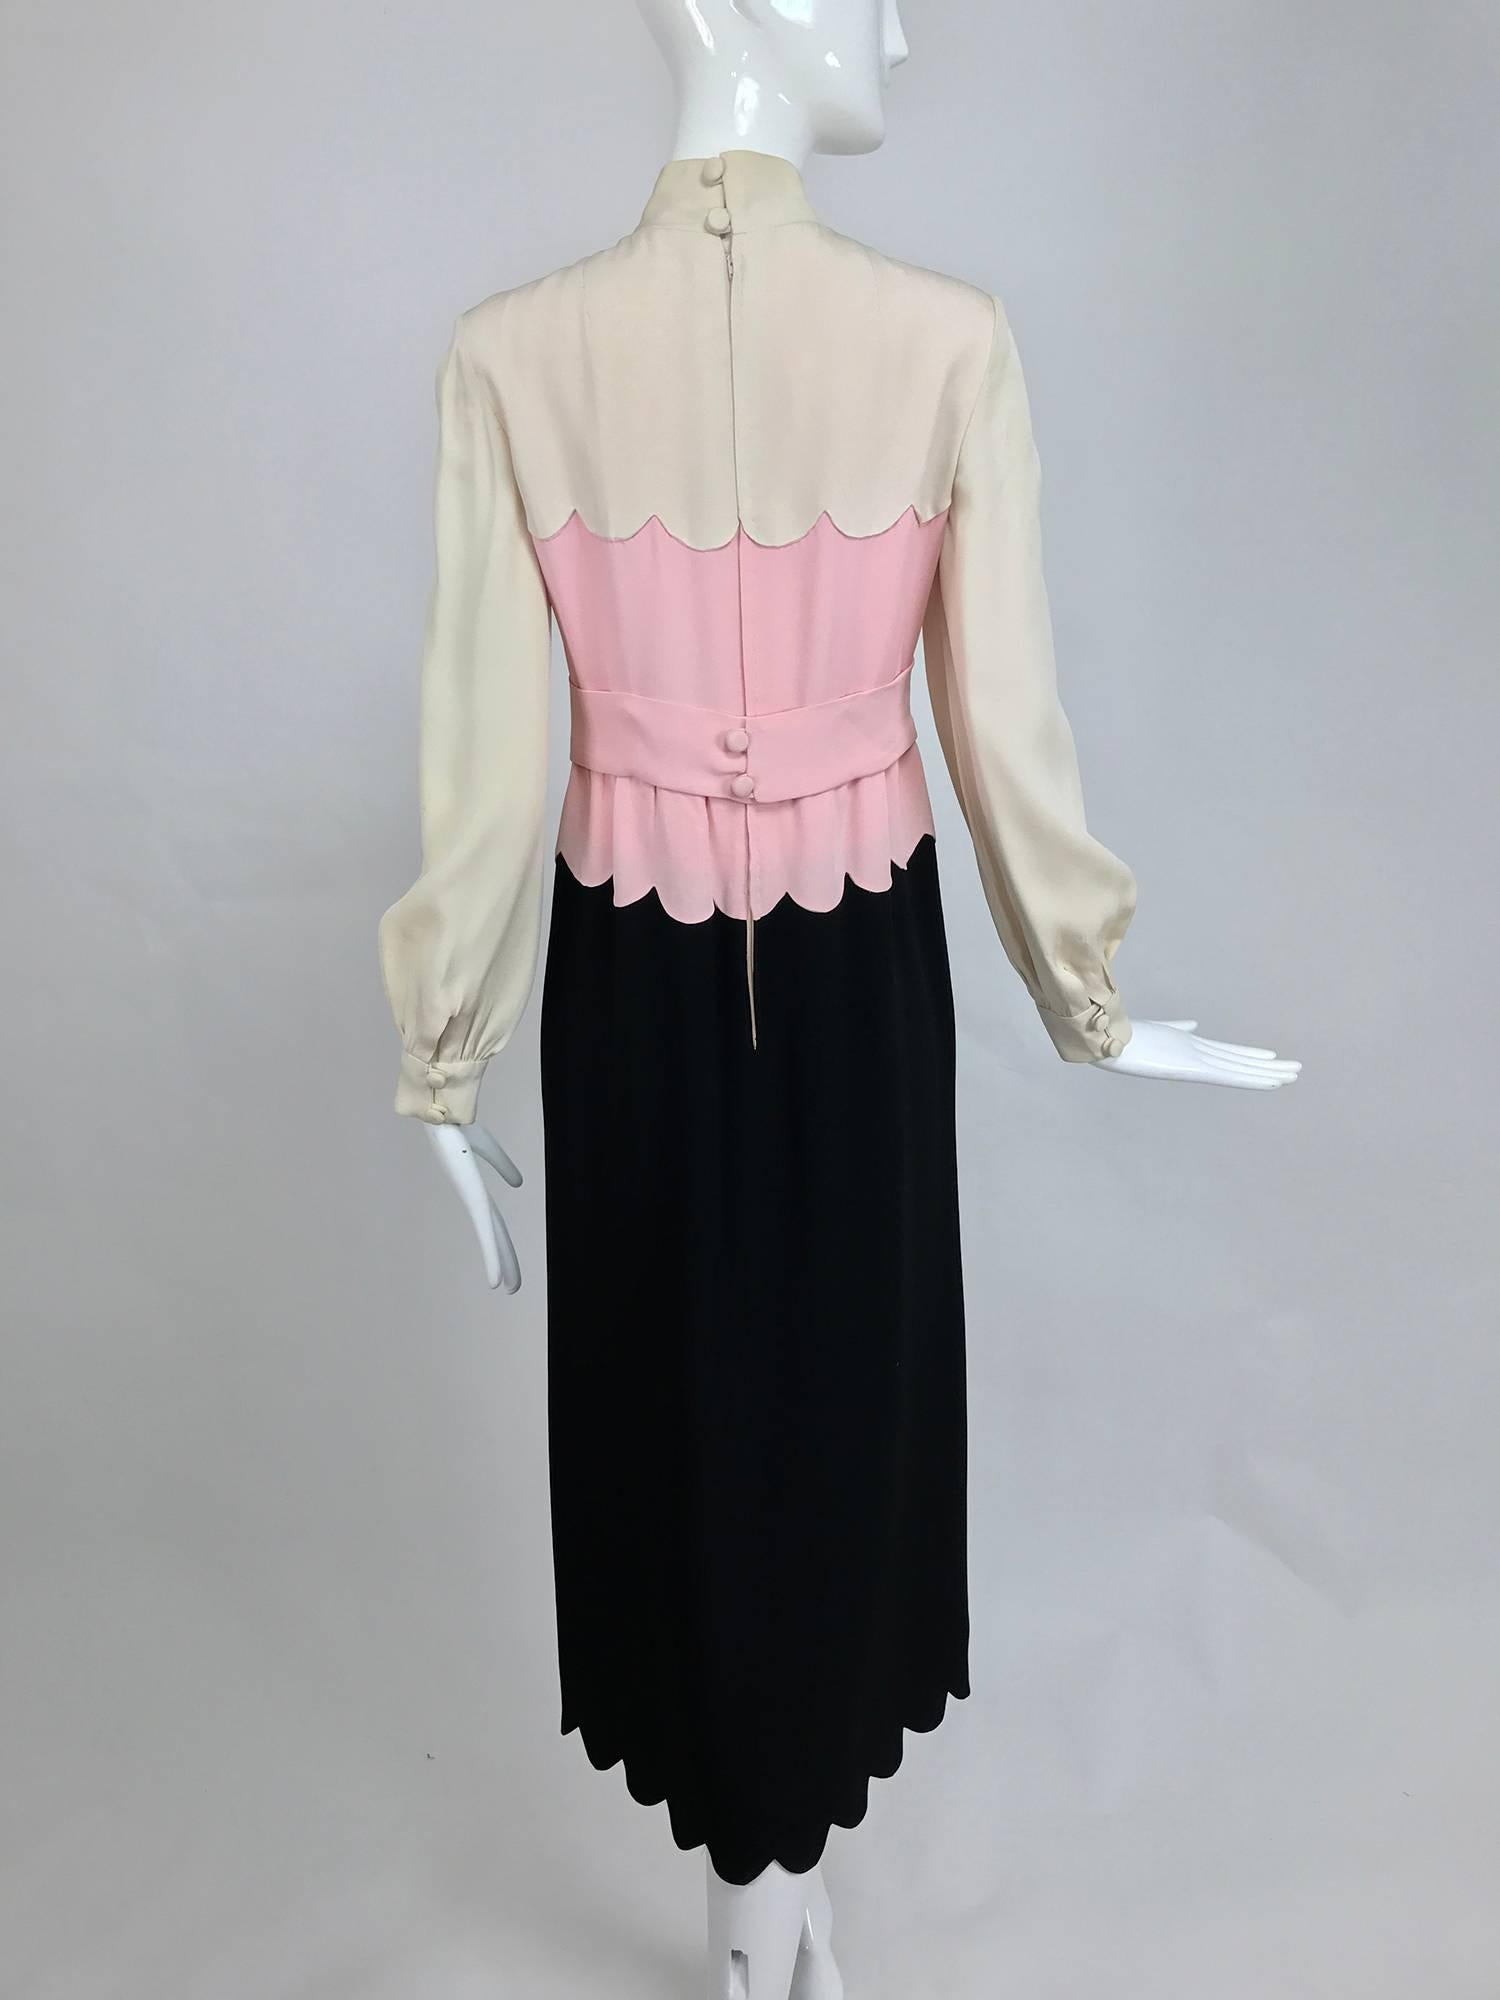 Women's Donald Brooks scalloped crepe dress in cream pink and black 1960s